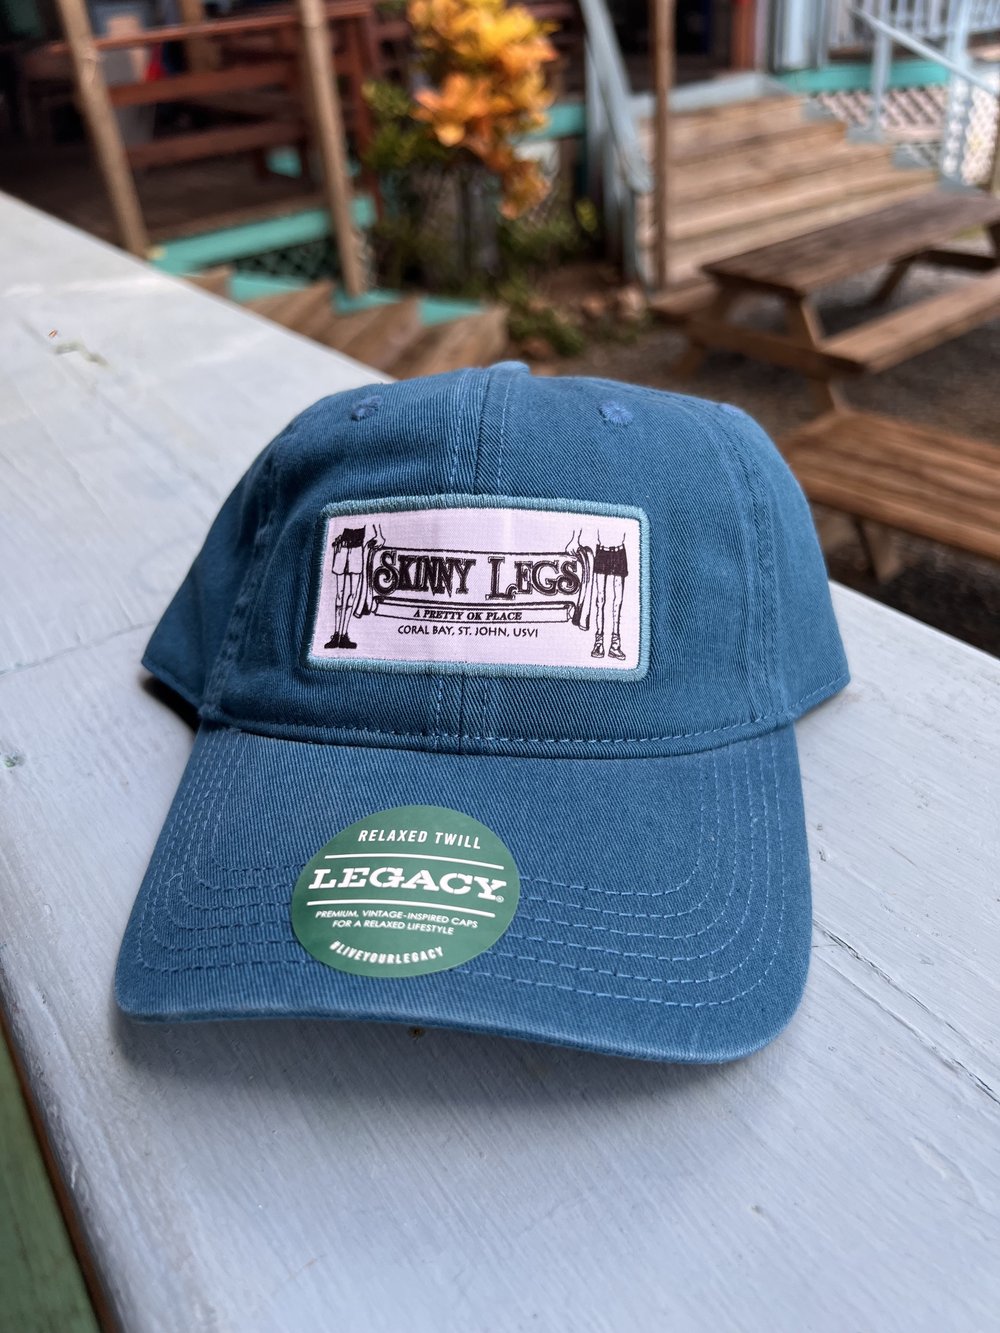 Hats, Coozies & More — Skinny Legs Bar and Grill